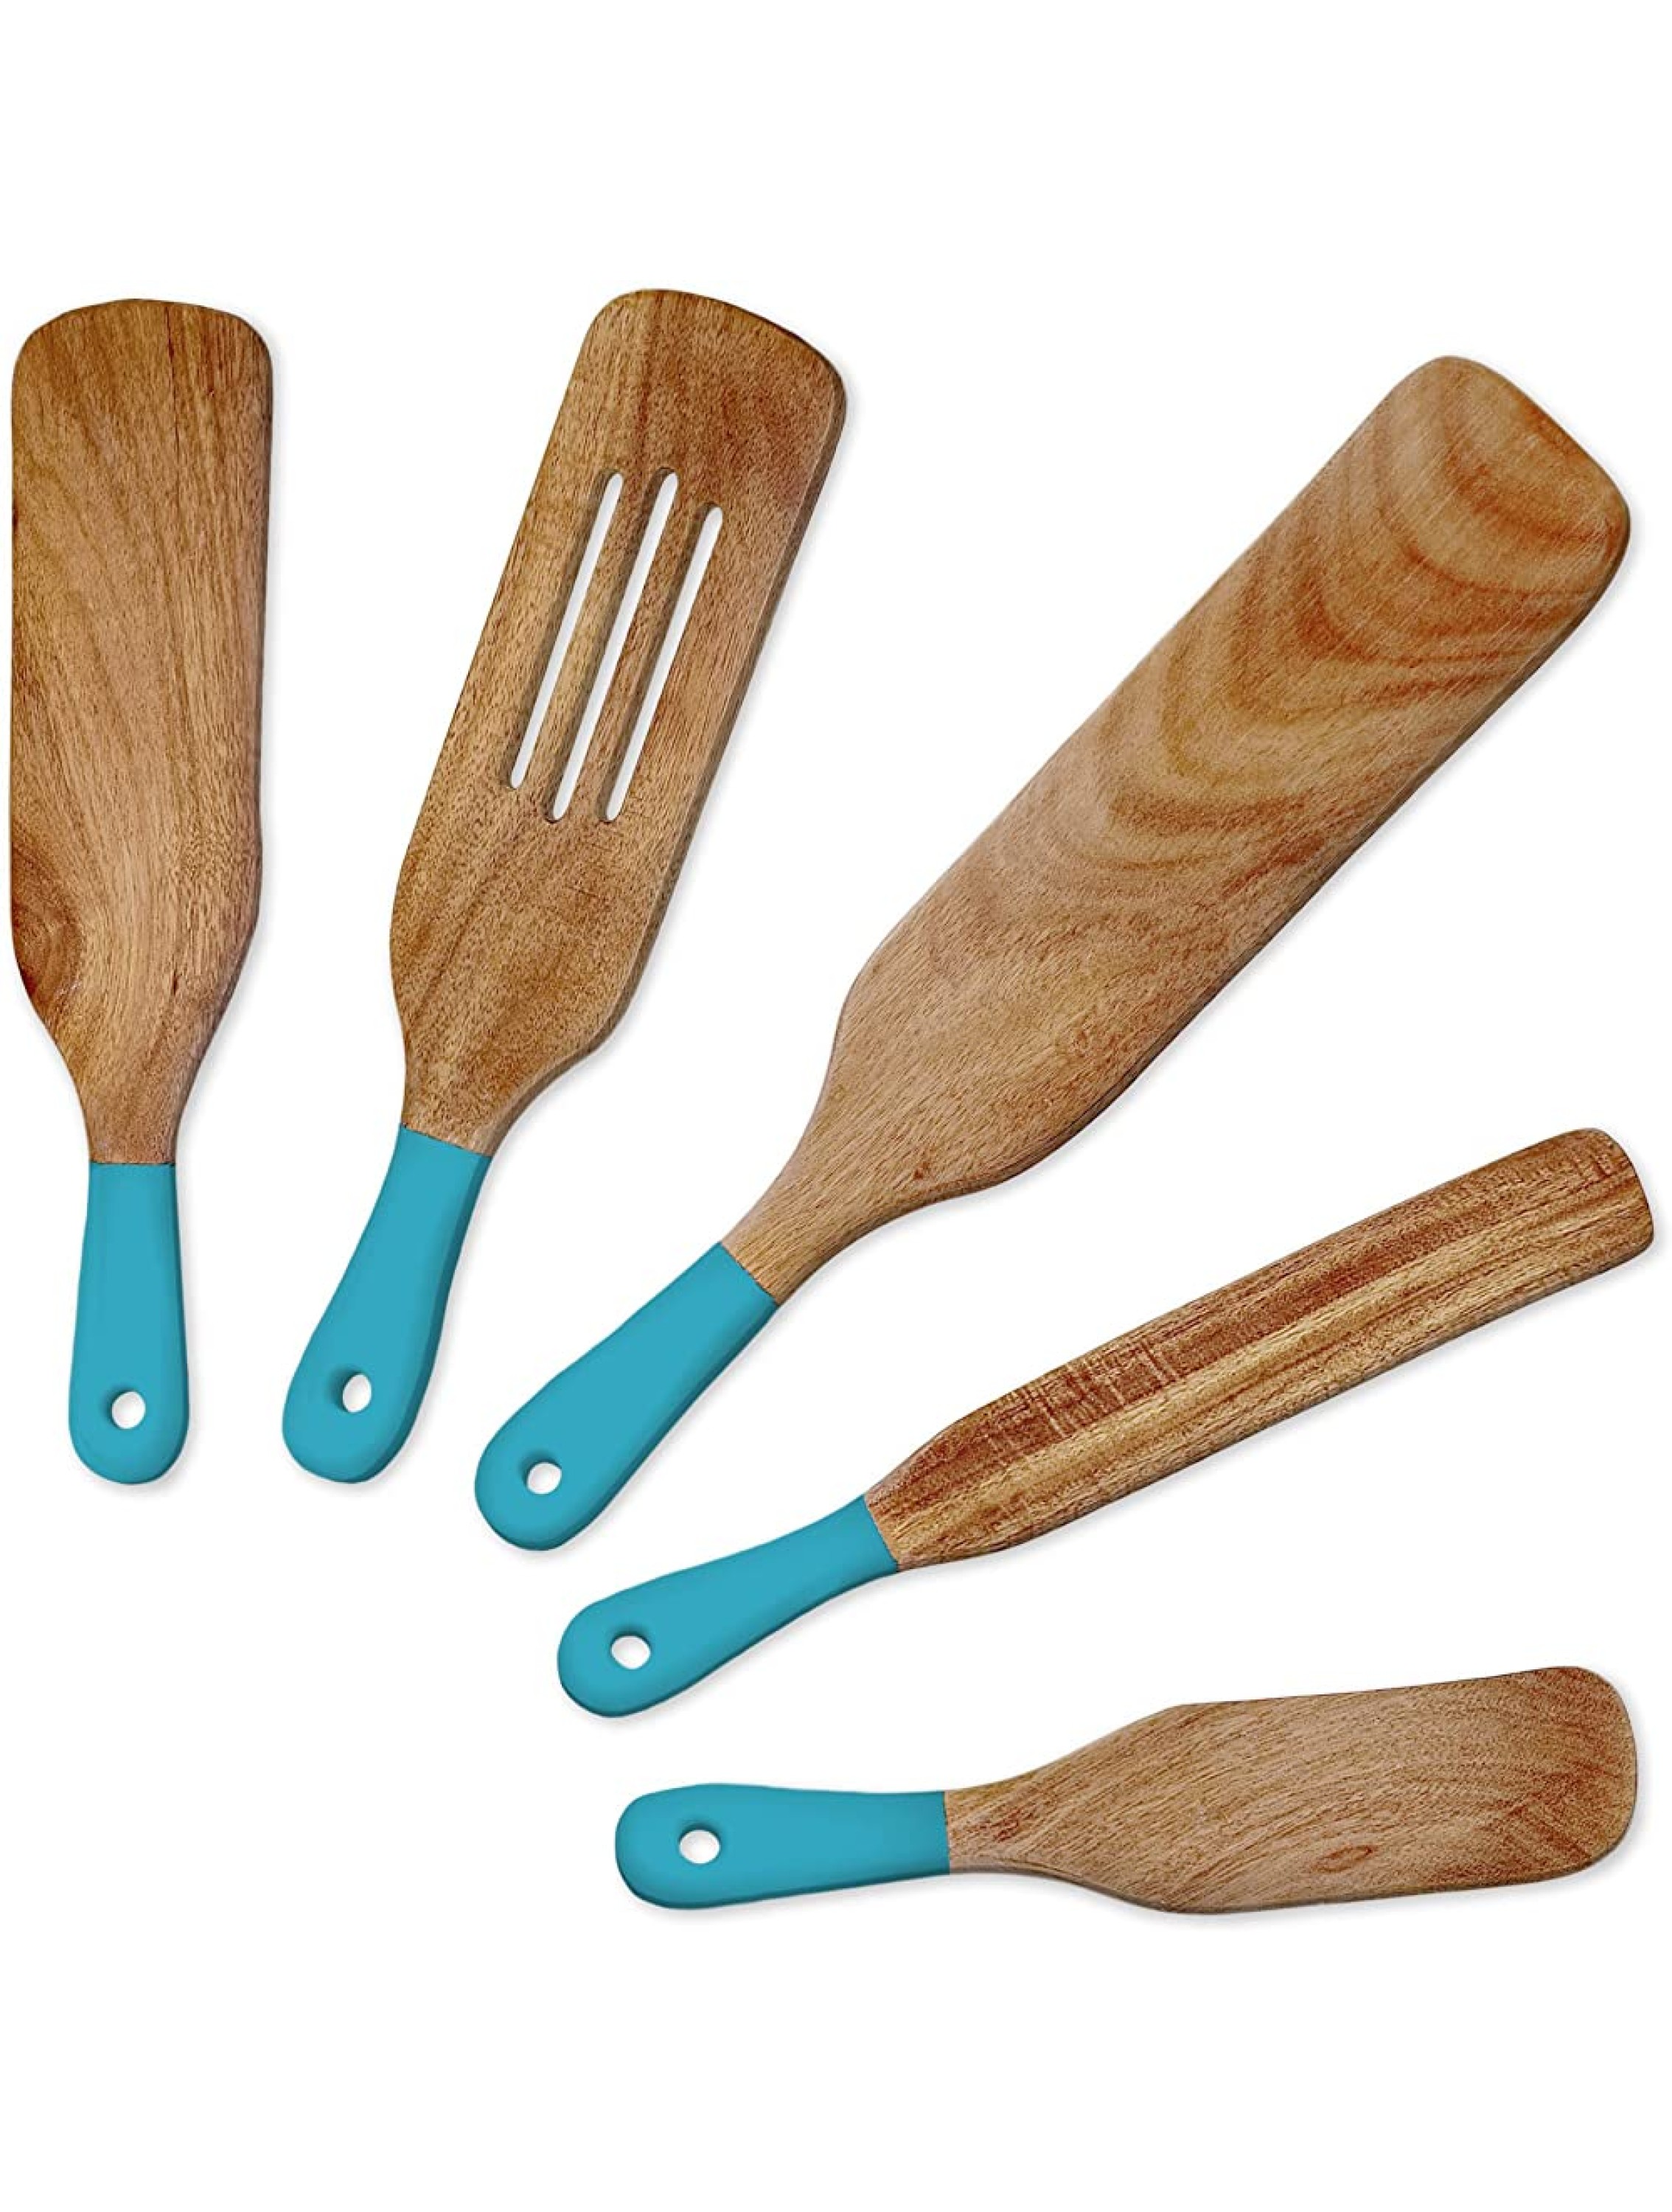 5 PC Modern Spurtle Set as Seen On TV Natural Teak Wood Spurtles Kitchen Tools Wooden Spurtle Set for Nonstick Cookware Heat Resistant and Non Stick. Teal - BSPII36KO